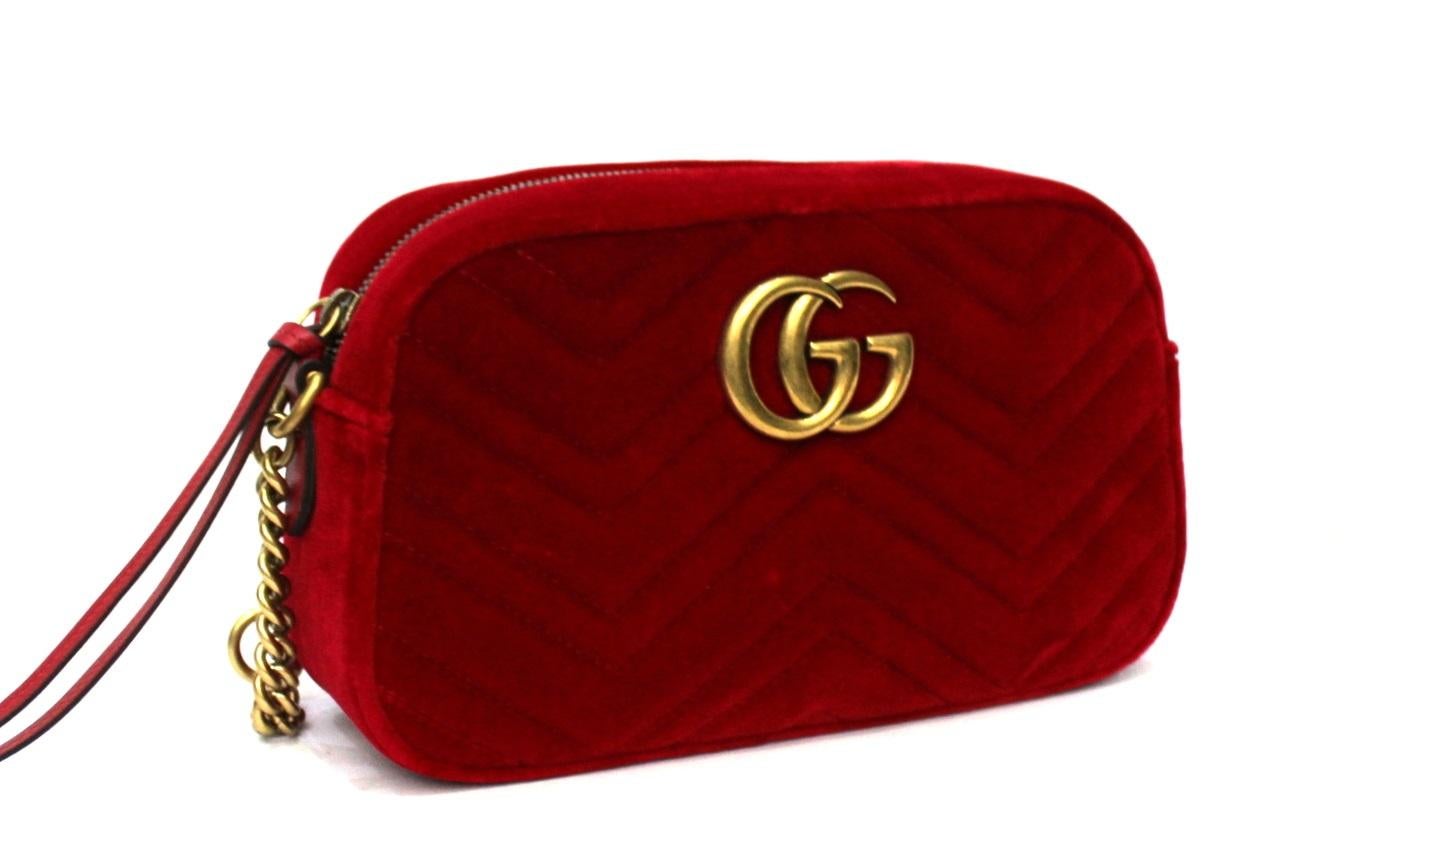 Camera bag Gucci Marmont line format bag, made of red velvet with golden hardware.

Zip closure, internally quite large.

Very good condition.